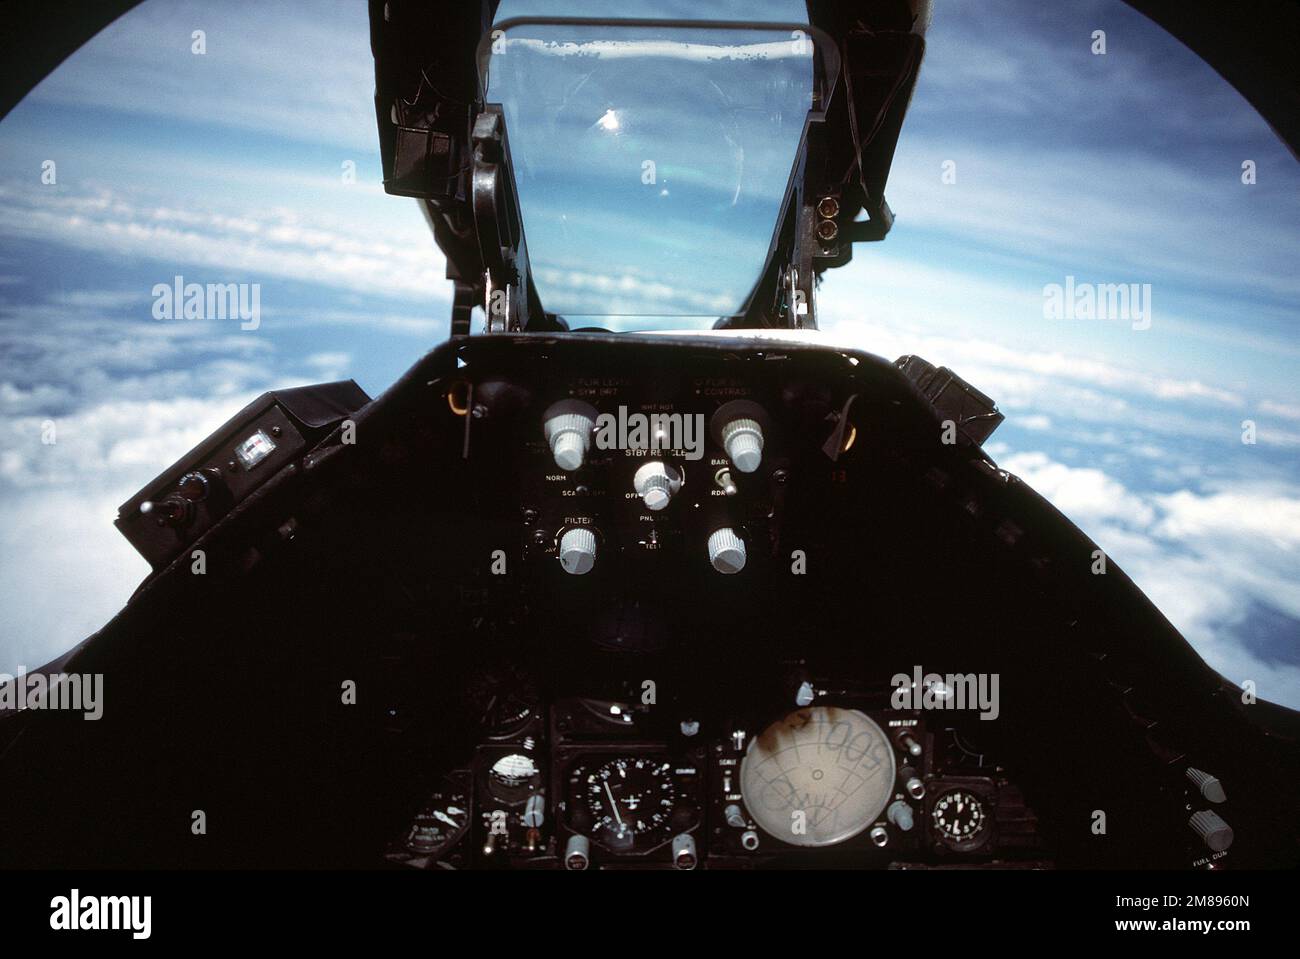 A view of the cockpit of an Attack Squadron 46 (VA-46) A-7E Corsair II aircraft. Country: Unknown Stock Photo